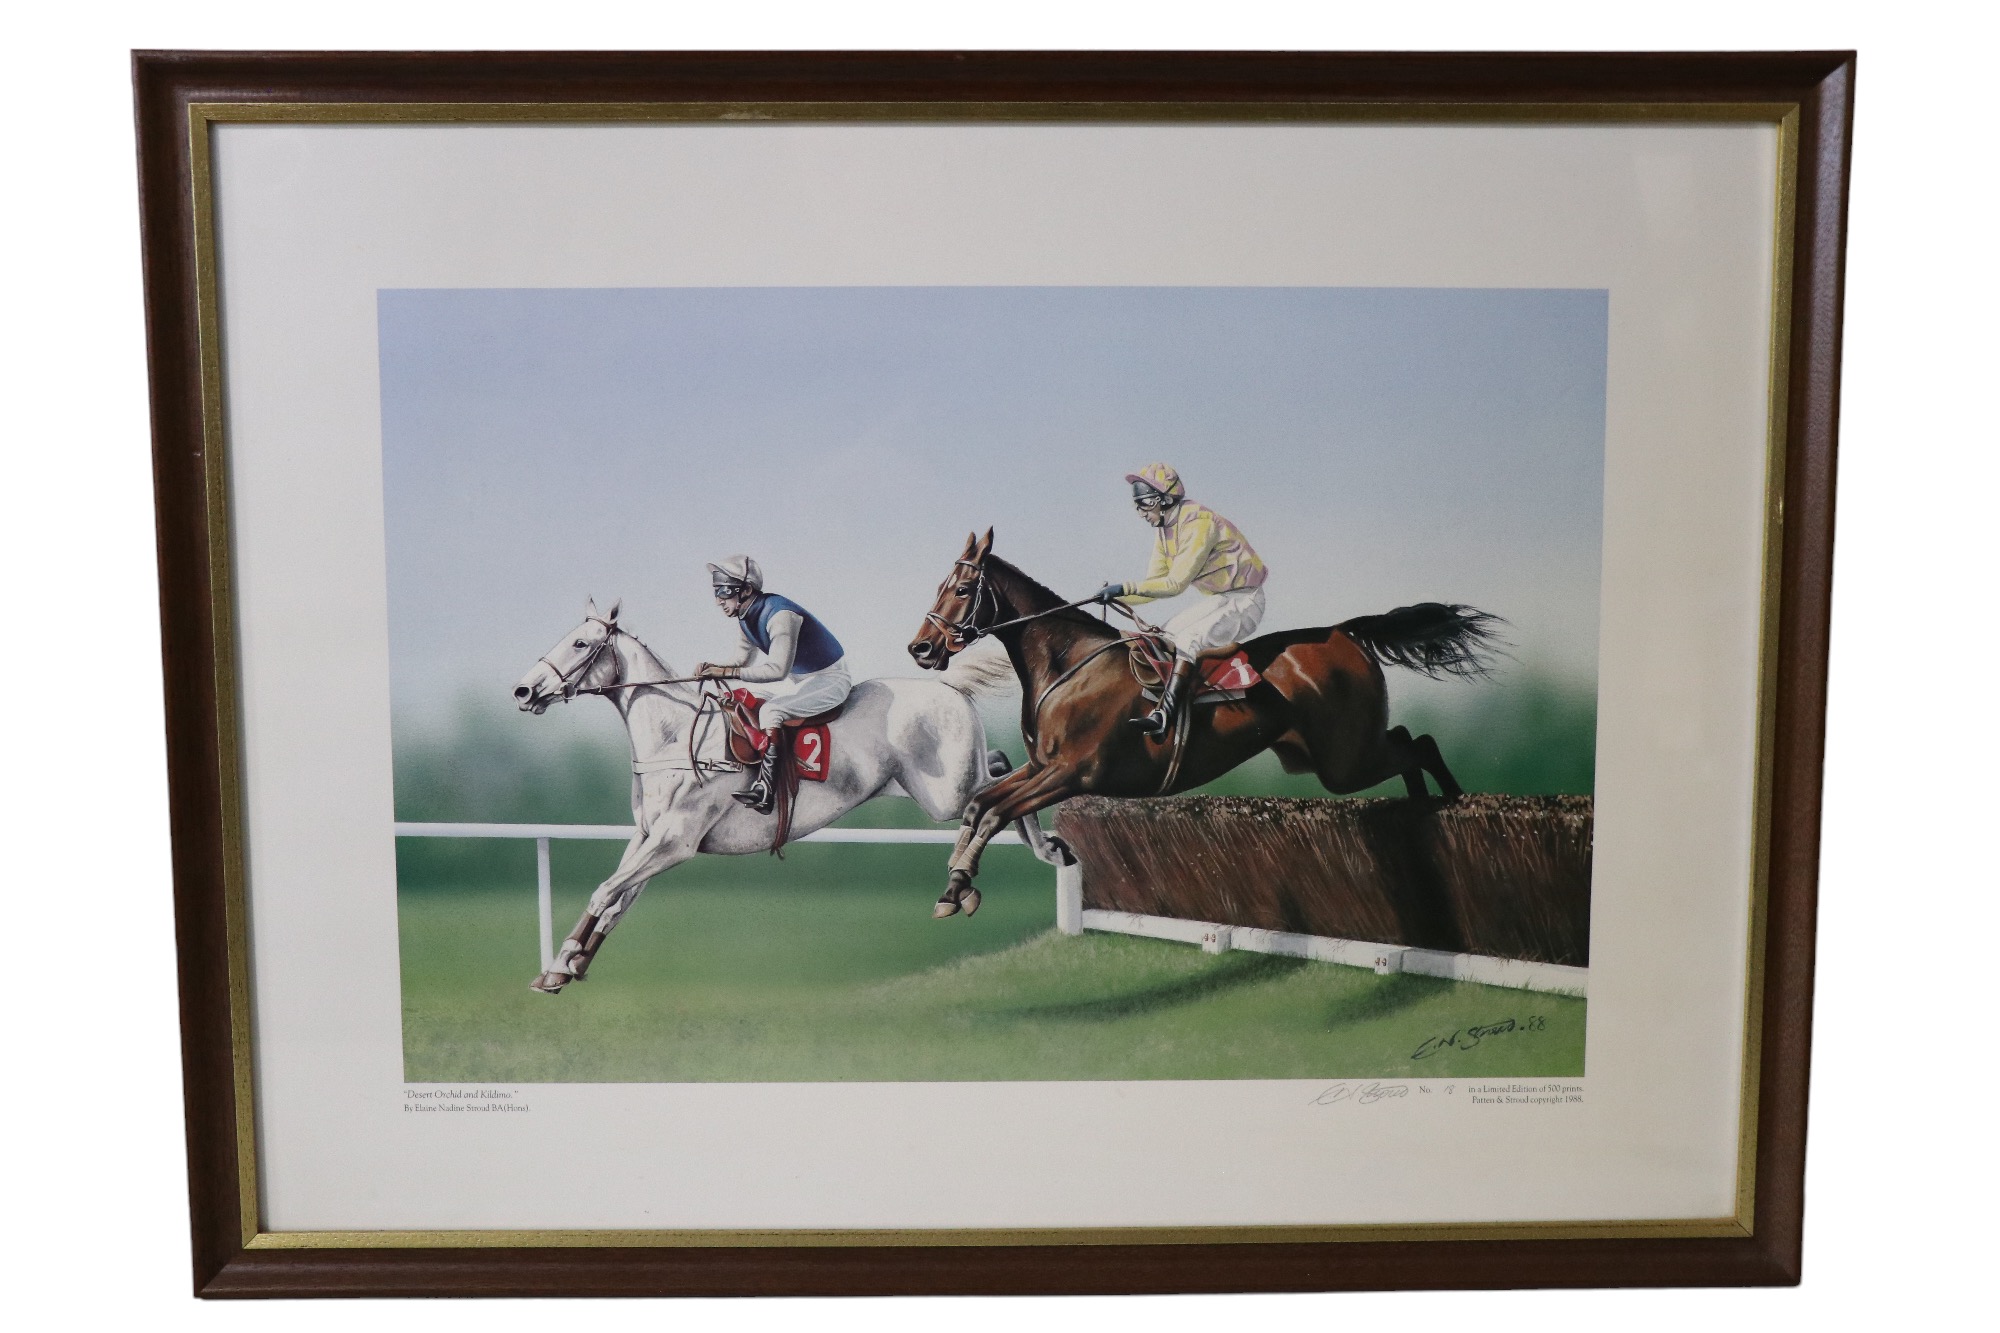 After Elaine Nadine Stroud "Desert Orchid and Kildimo", "Triptych", "Dancing Brave and Pat